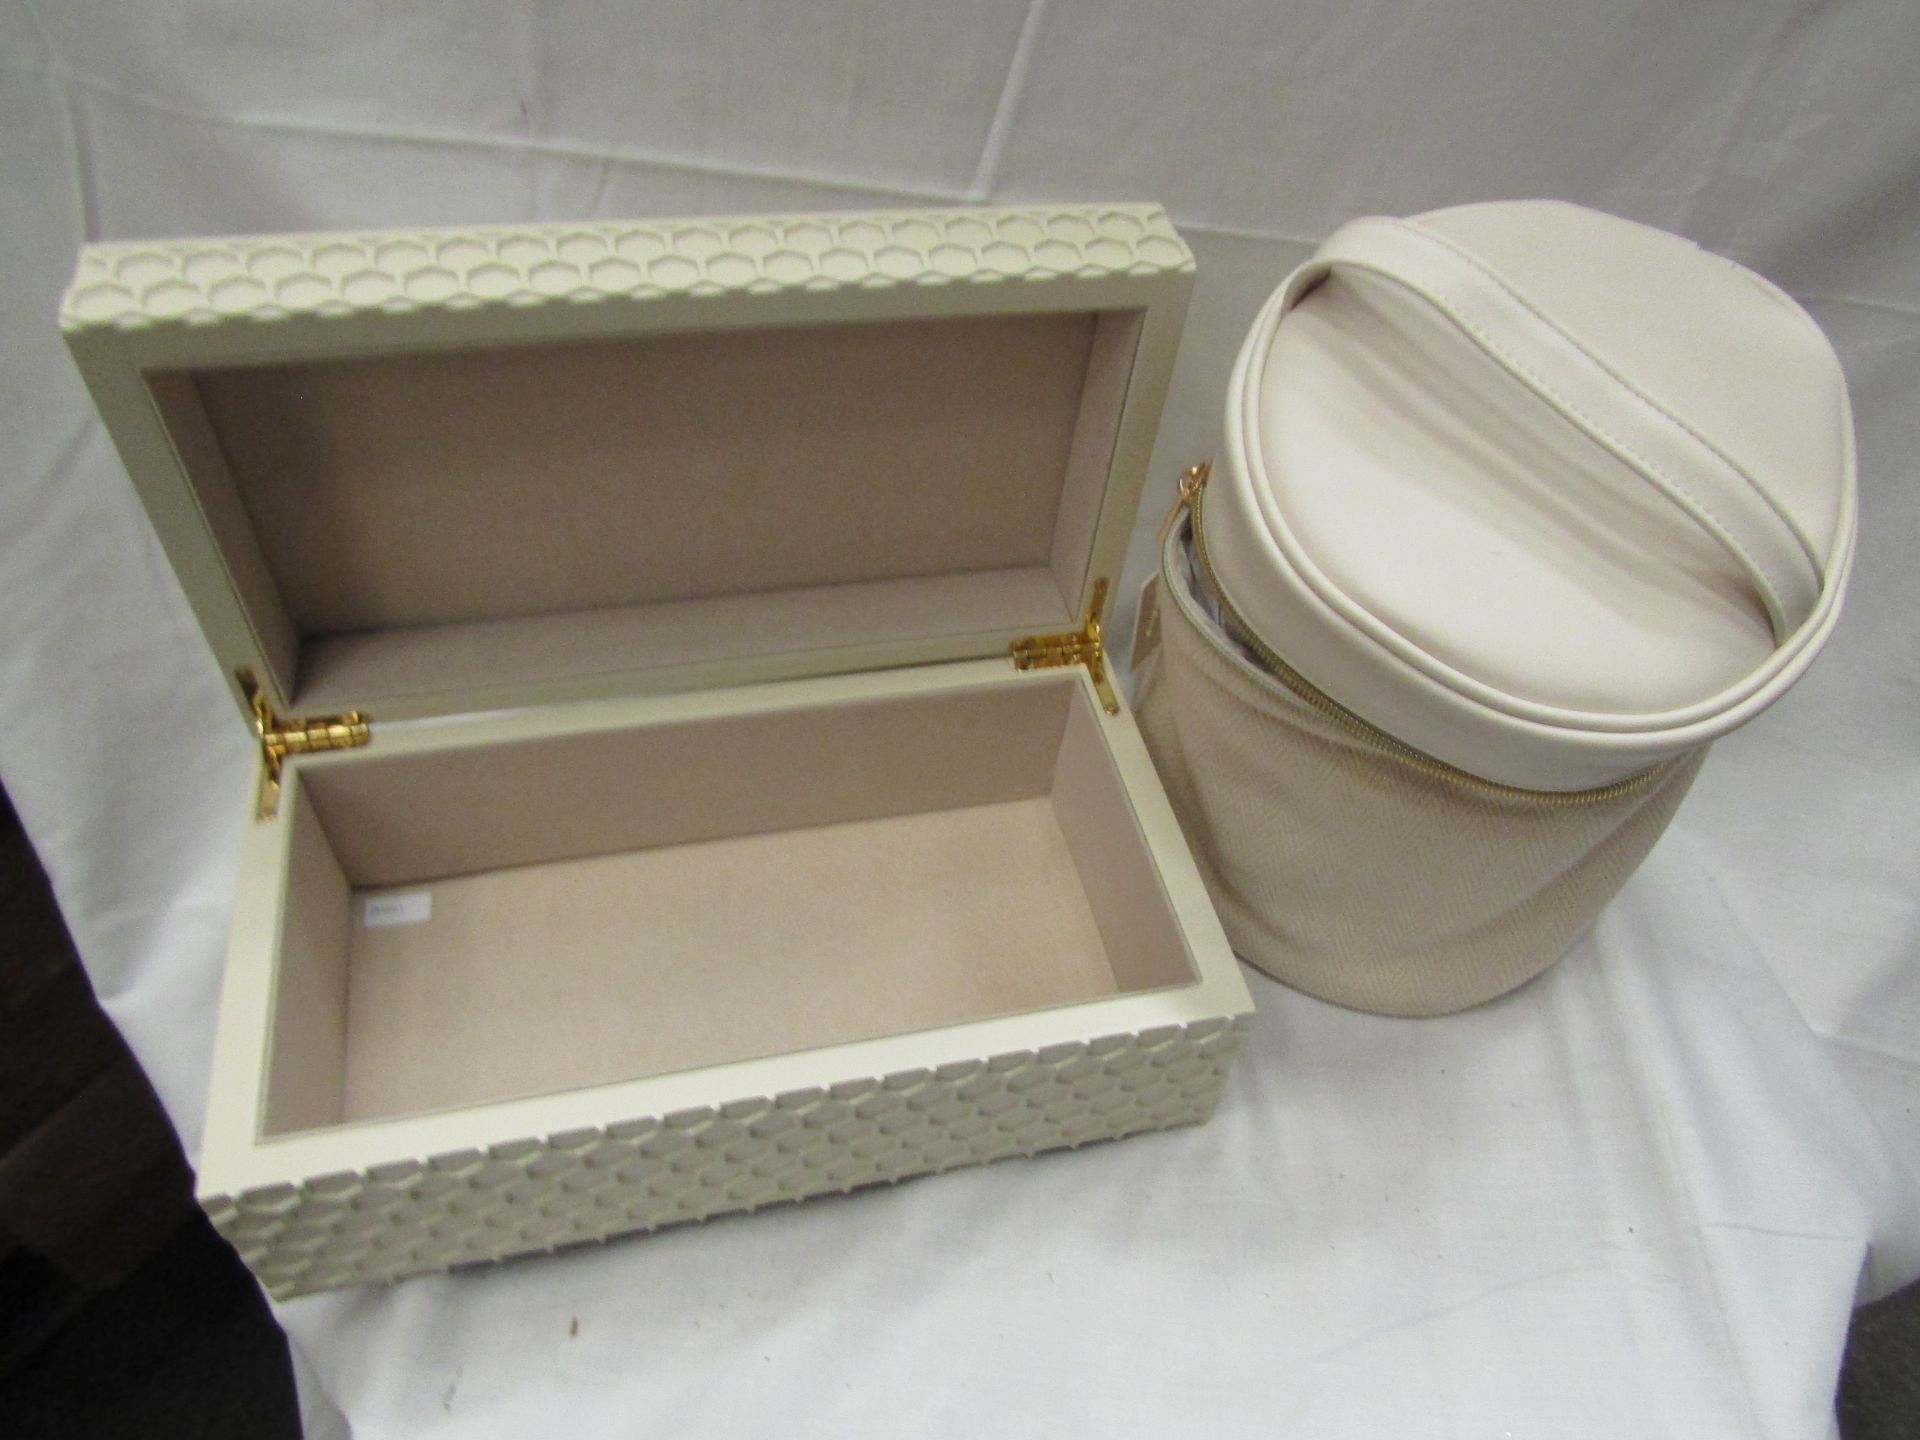 2 X Items Being a Lovely Cream Wooden Box Approx 12" X 6" & 1 X Cream Make Up Bag Both Unused